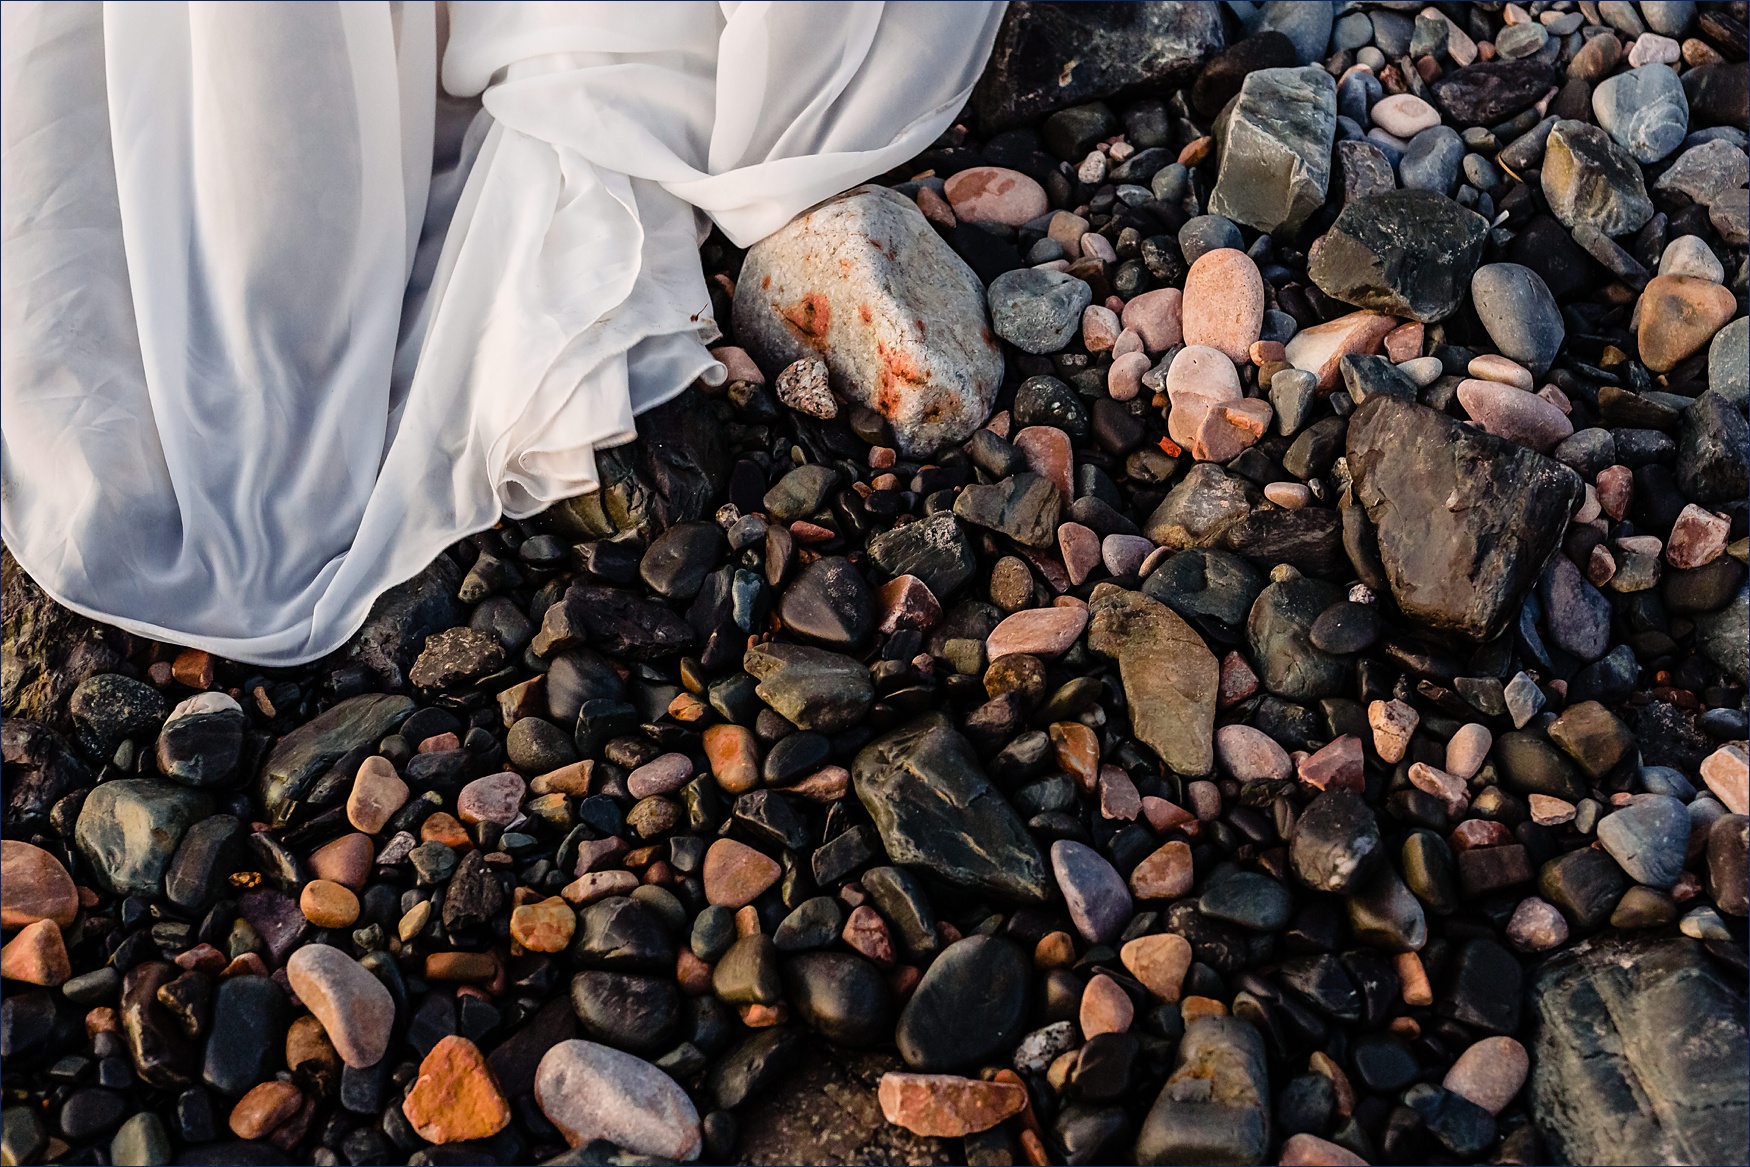 The bride's dress on the rocky shore of the beach